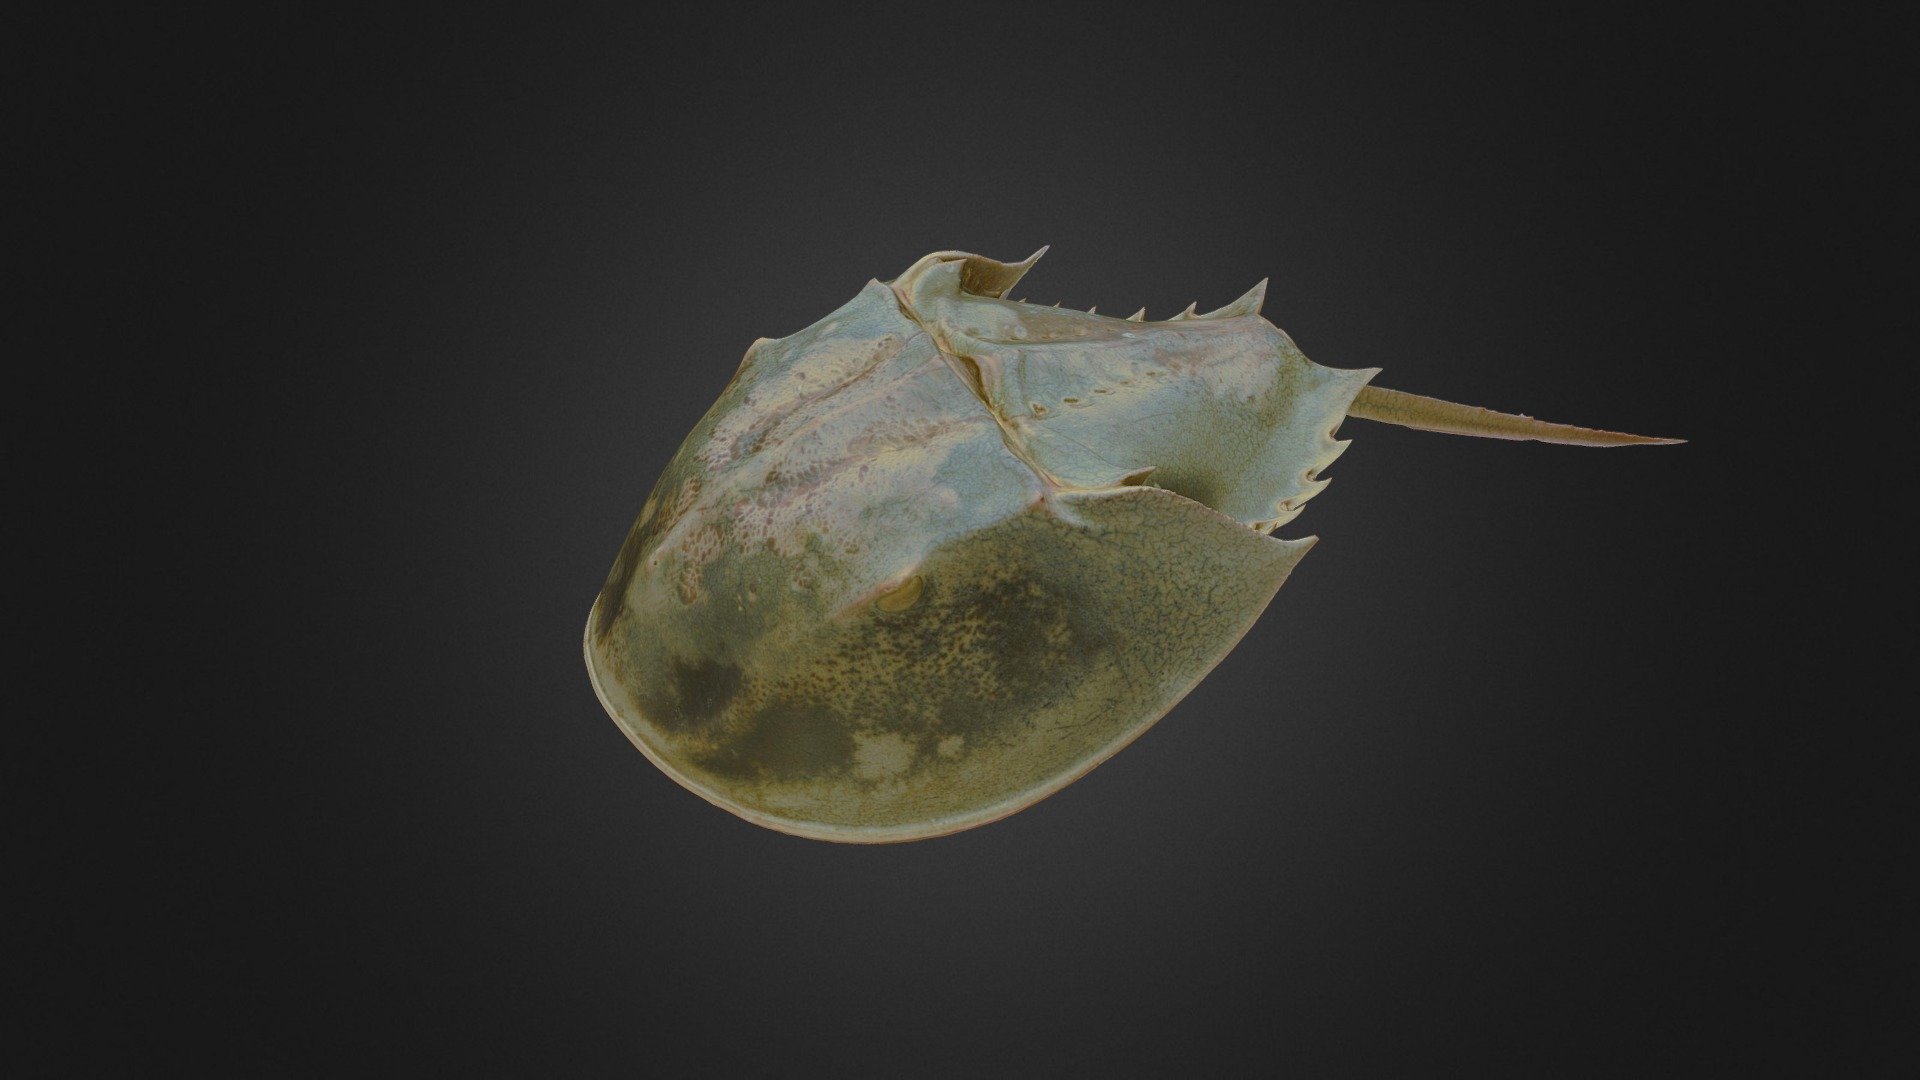 Horseshoe crab from the natural history collection of Bolton Library and Museum Services.

Photography Credit: Ardern Hulme-Beaman, Sarah McBride

Model Credit: Ardern Hulme-Beaman

Produced as part of the Museums of the North West Photogrammetry Hub: Building Virtual 3D Futures project. Learn more  here 3d model